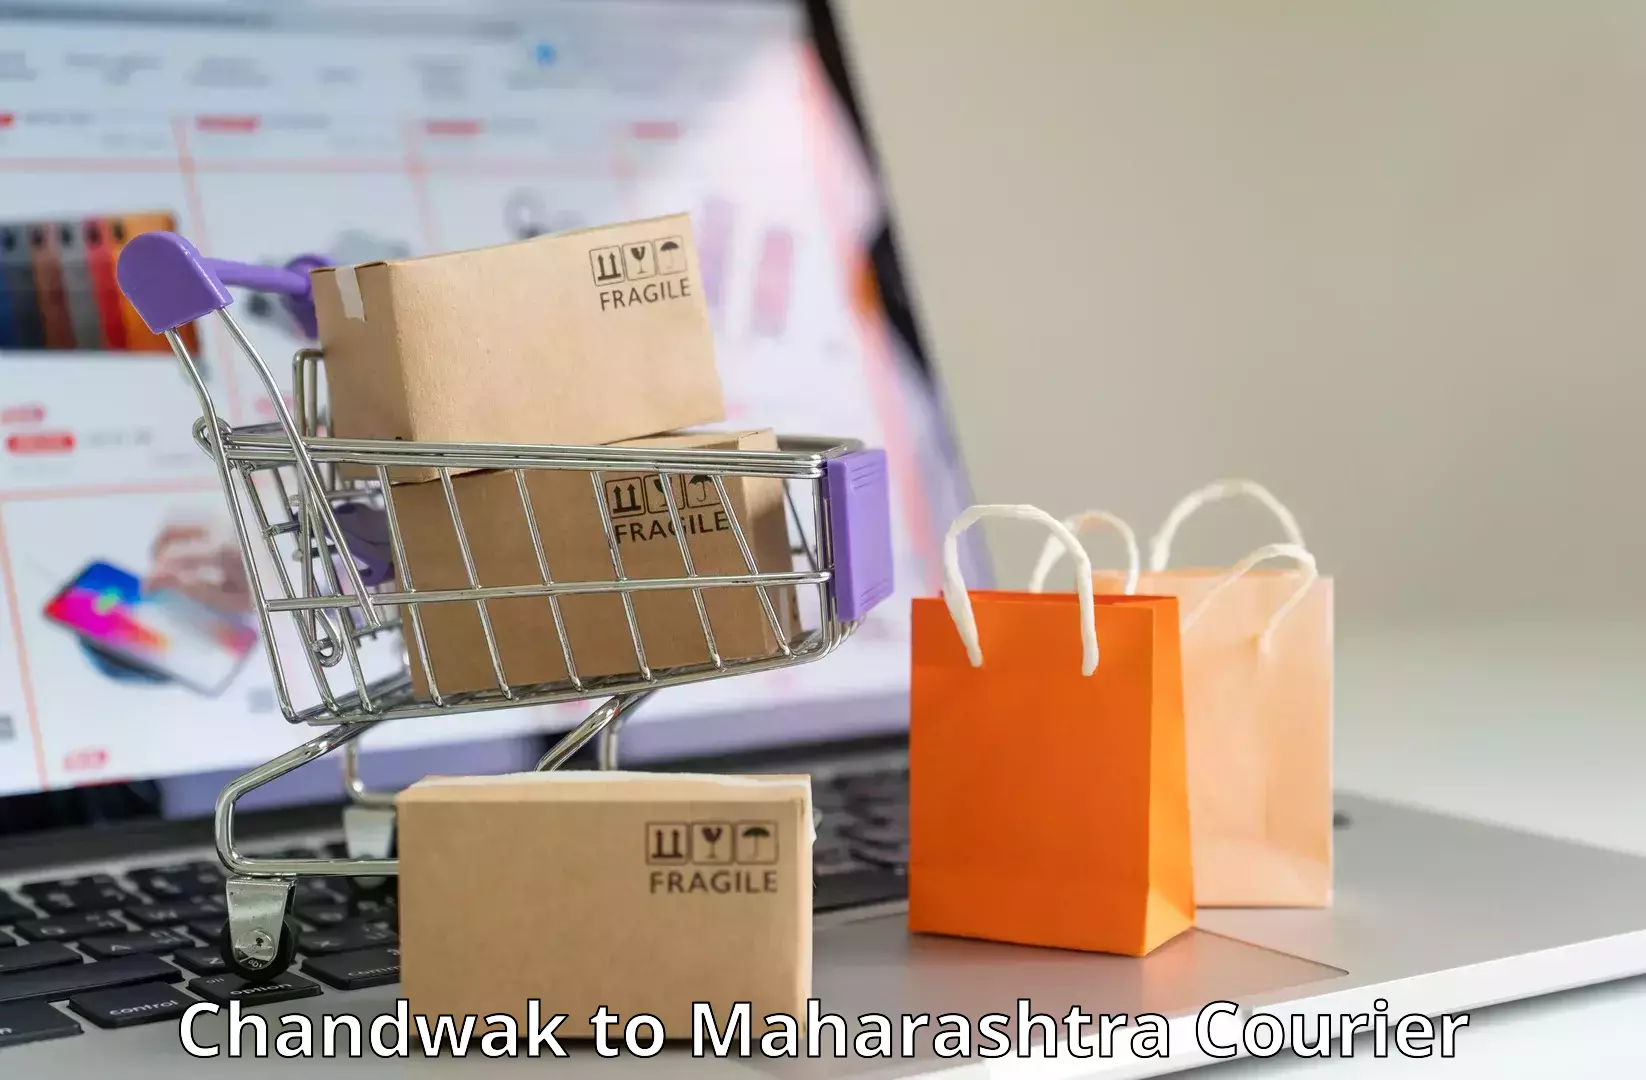 Efficient parcel delivery in Chandwak to Kalyan Dombivli